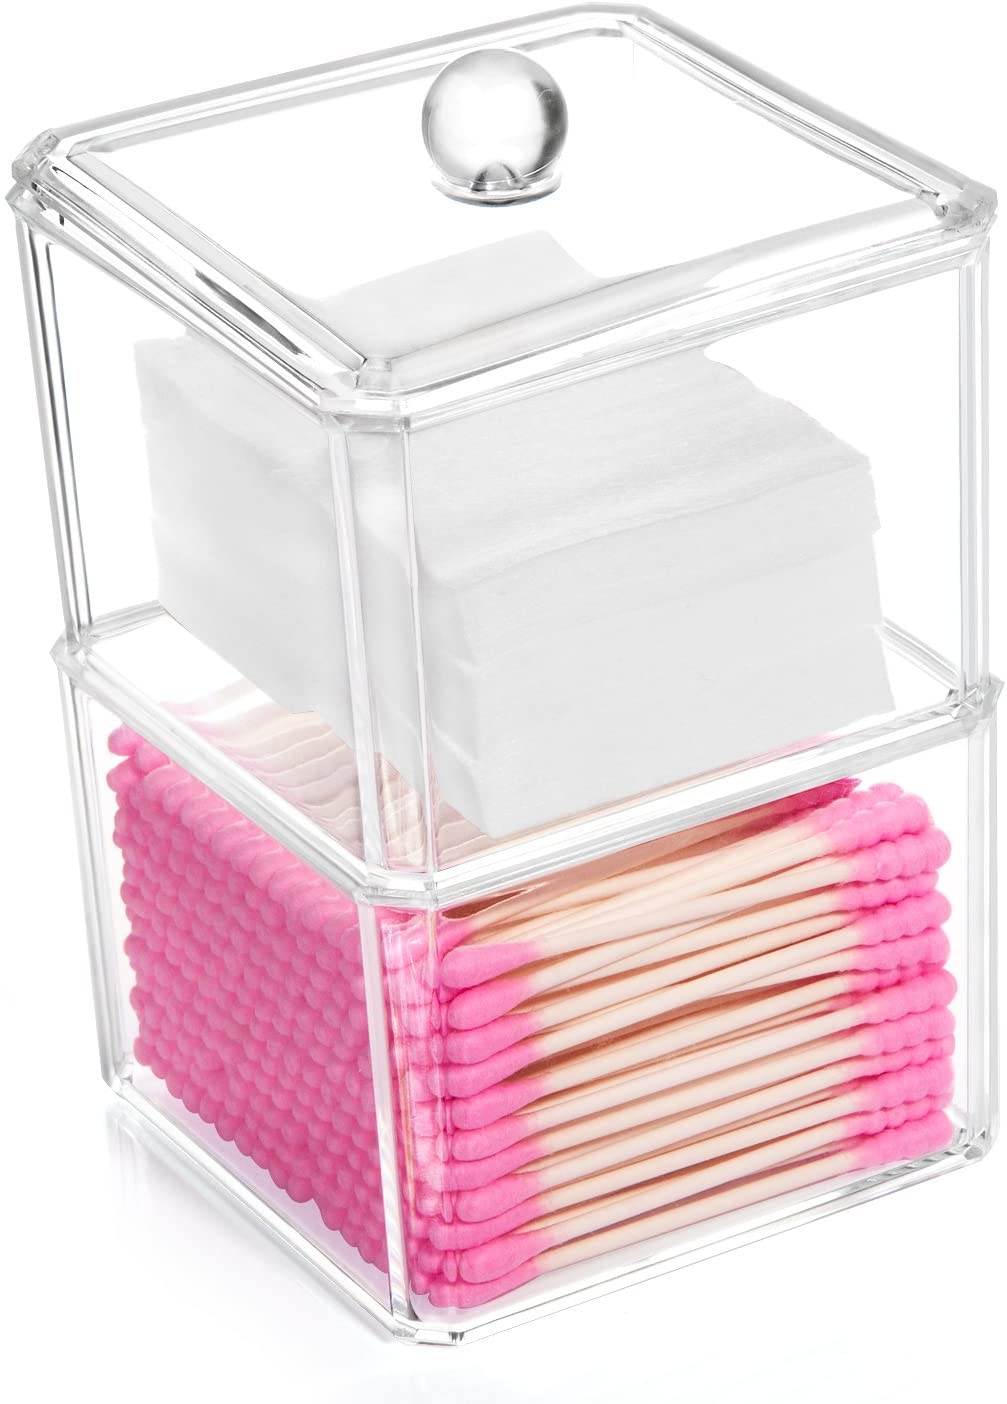 A+Selected Qtips Cotton Balls Makeup Holder with Lid, Acrylic Organizer 3  Section Drawer Tray and Storage for Cotton Swabs, Q-Tips, Make Up Pads